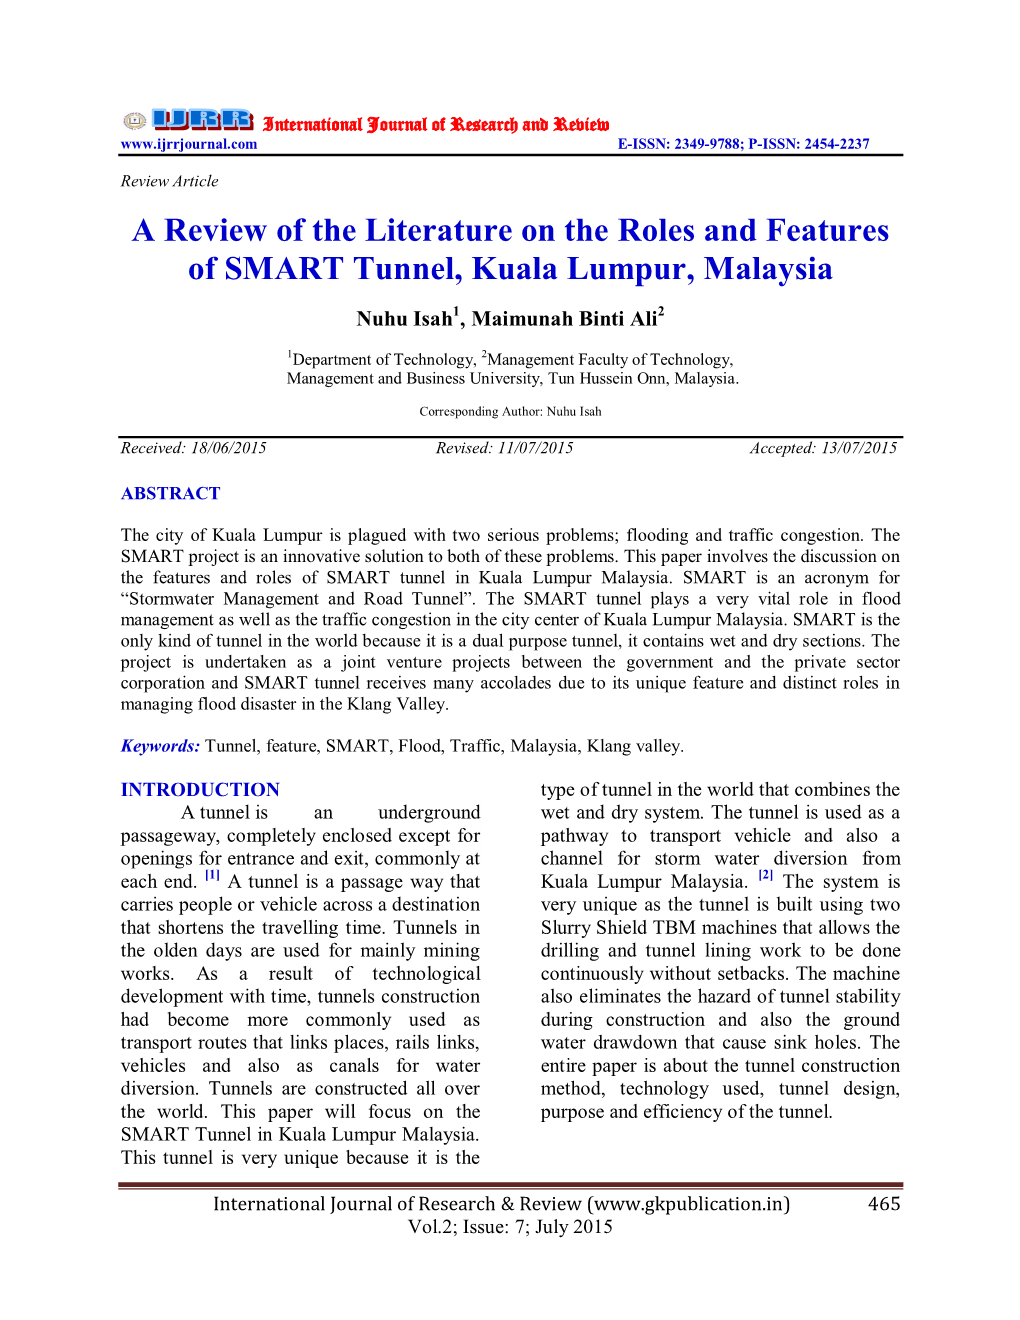 A Review of the Literature on the Rolesand Features of SMART Tunnel, Kuala Lumpur, Malaysia